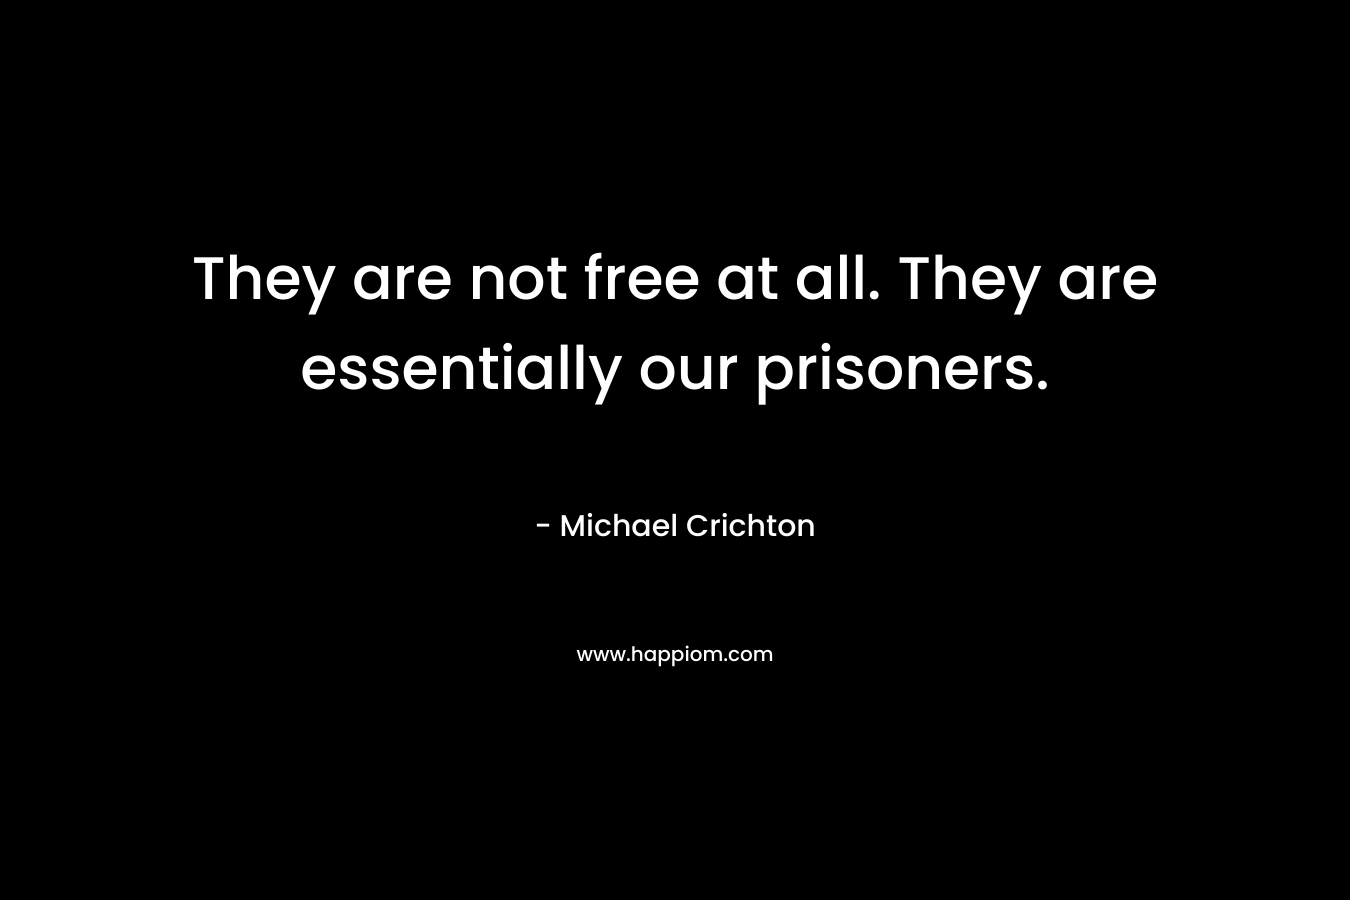 They are not free at all. They are essentially our prisoners.